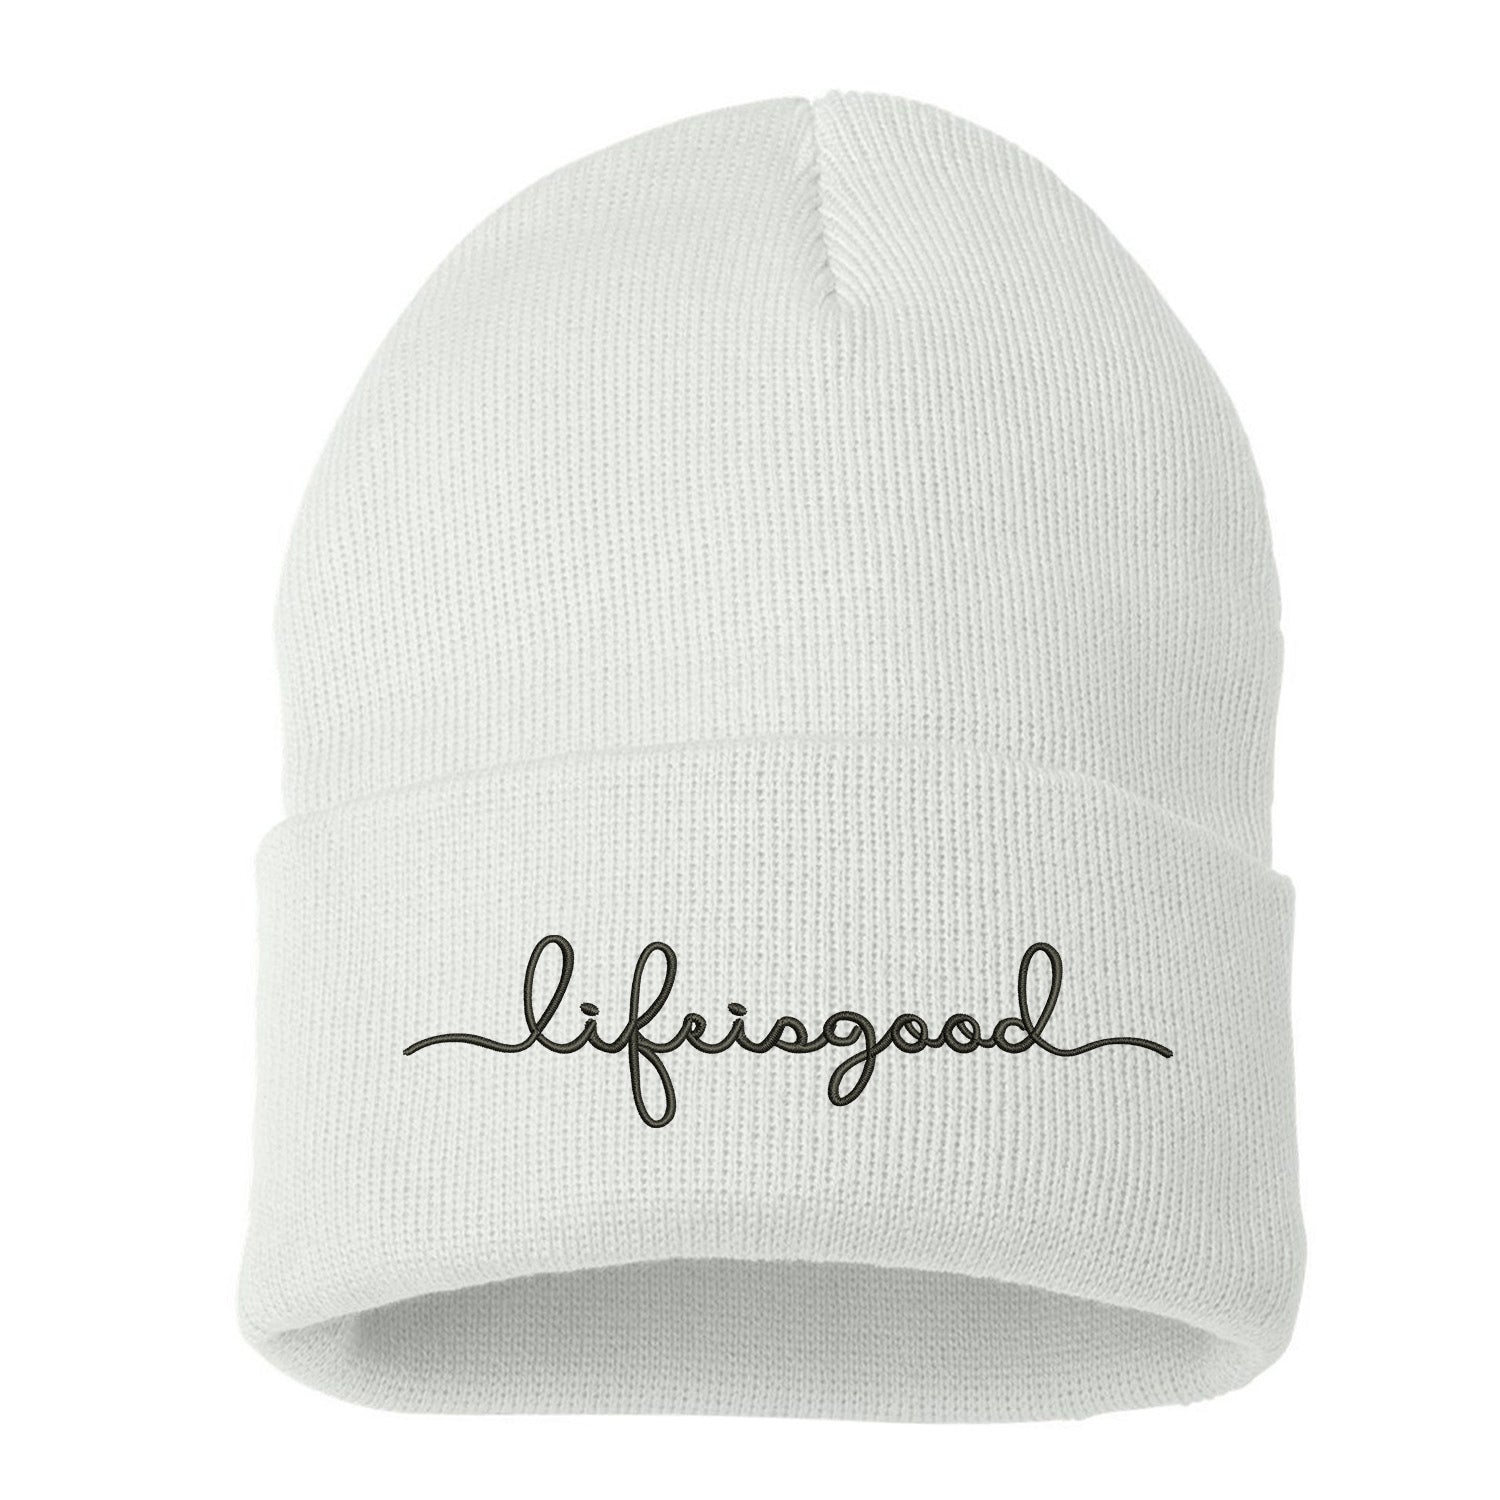 Life is good Cuffed Beanie - Prfcto Lifestyle